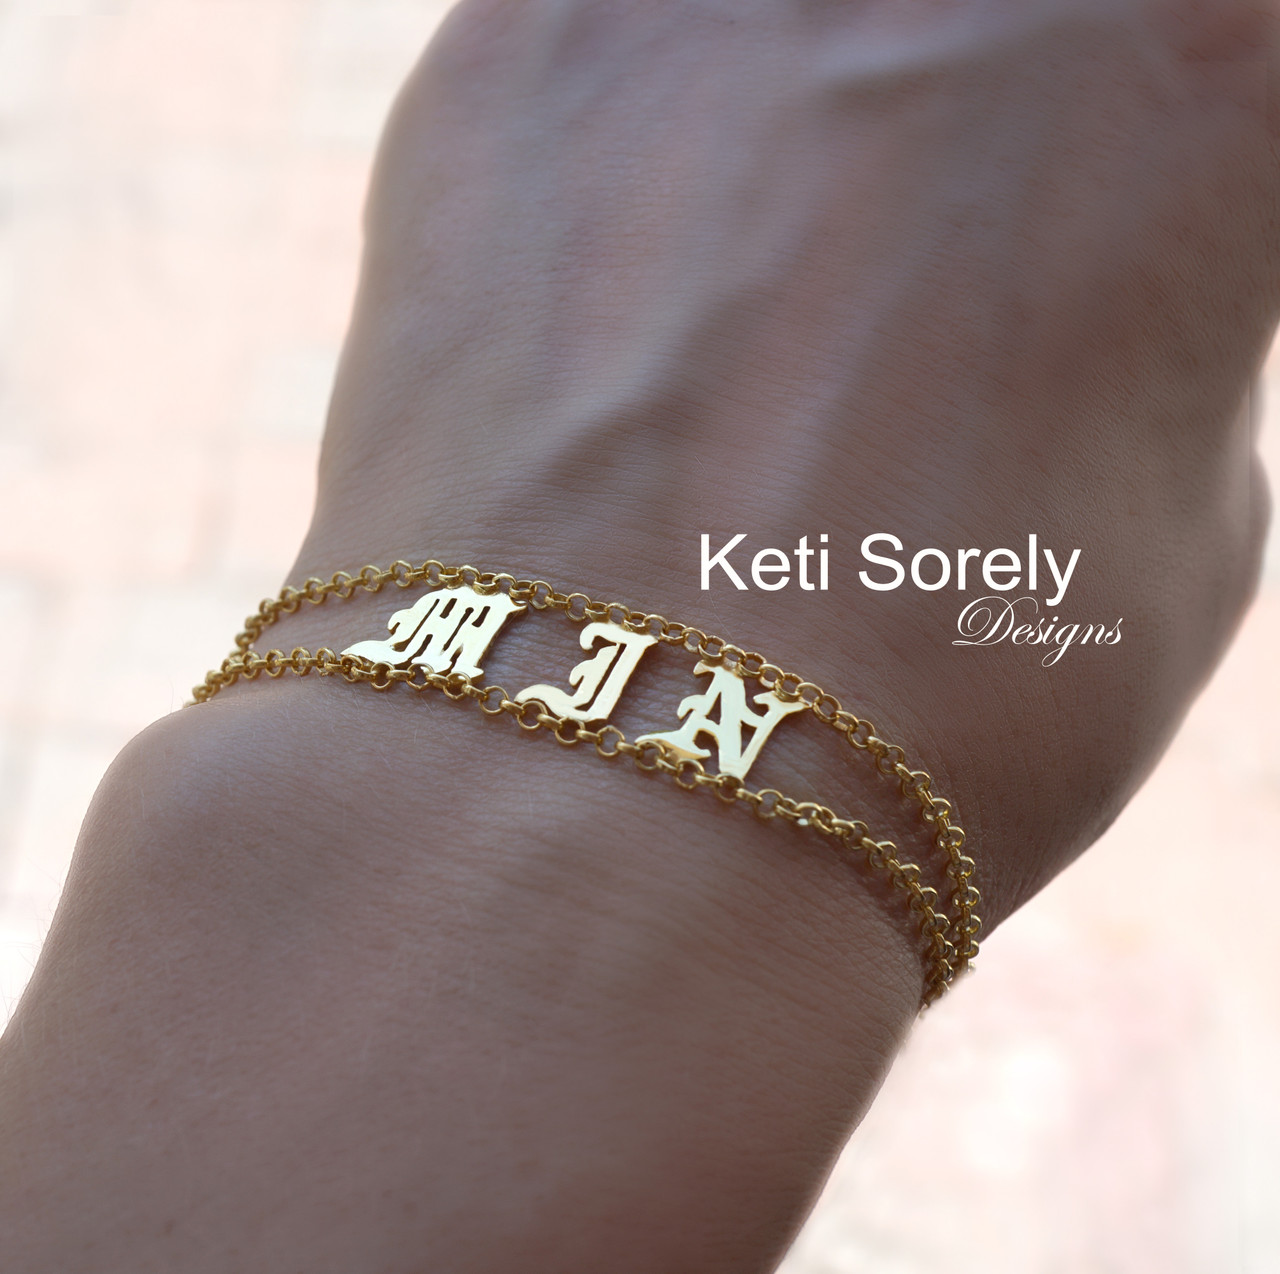 Personalized Name Bracelet with Butterfly - Pin It Up